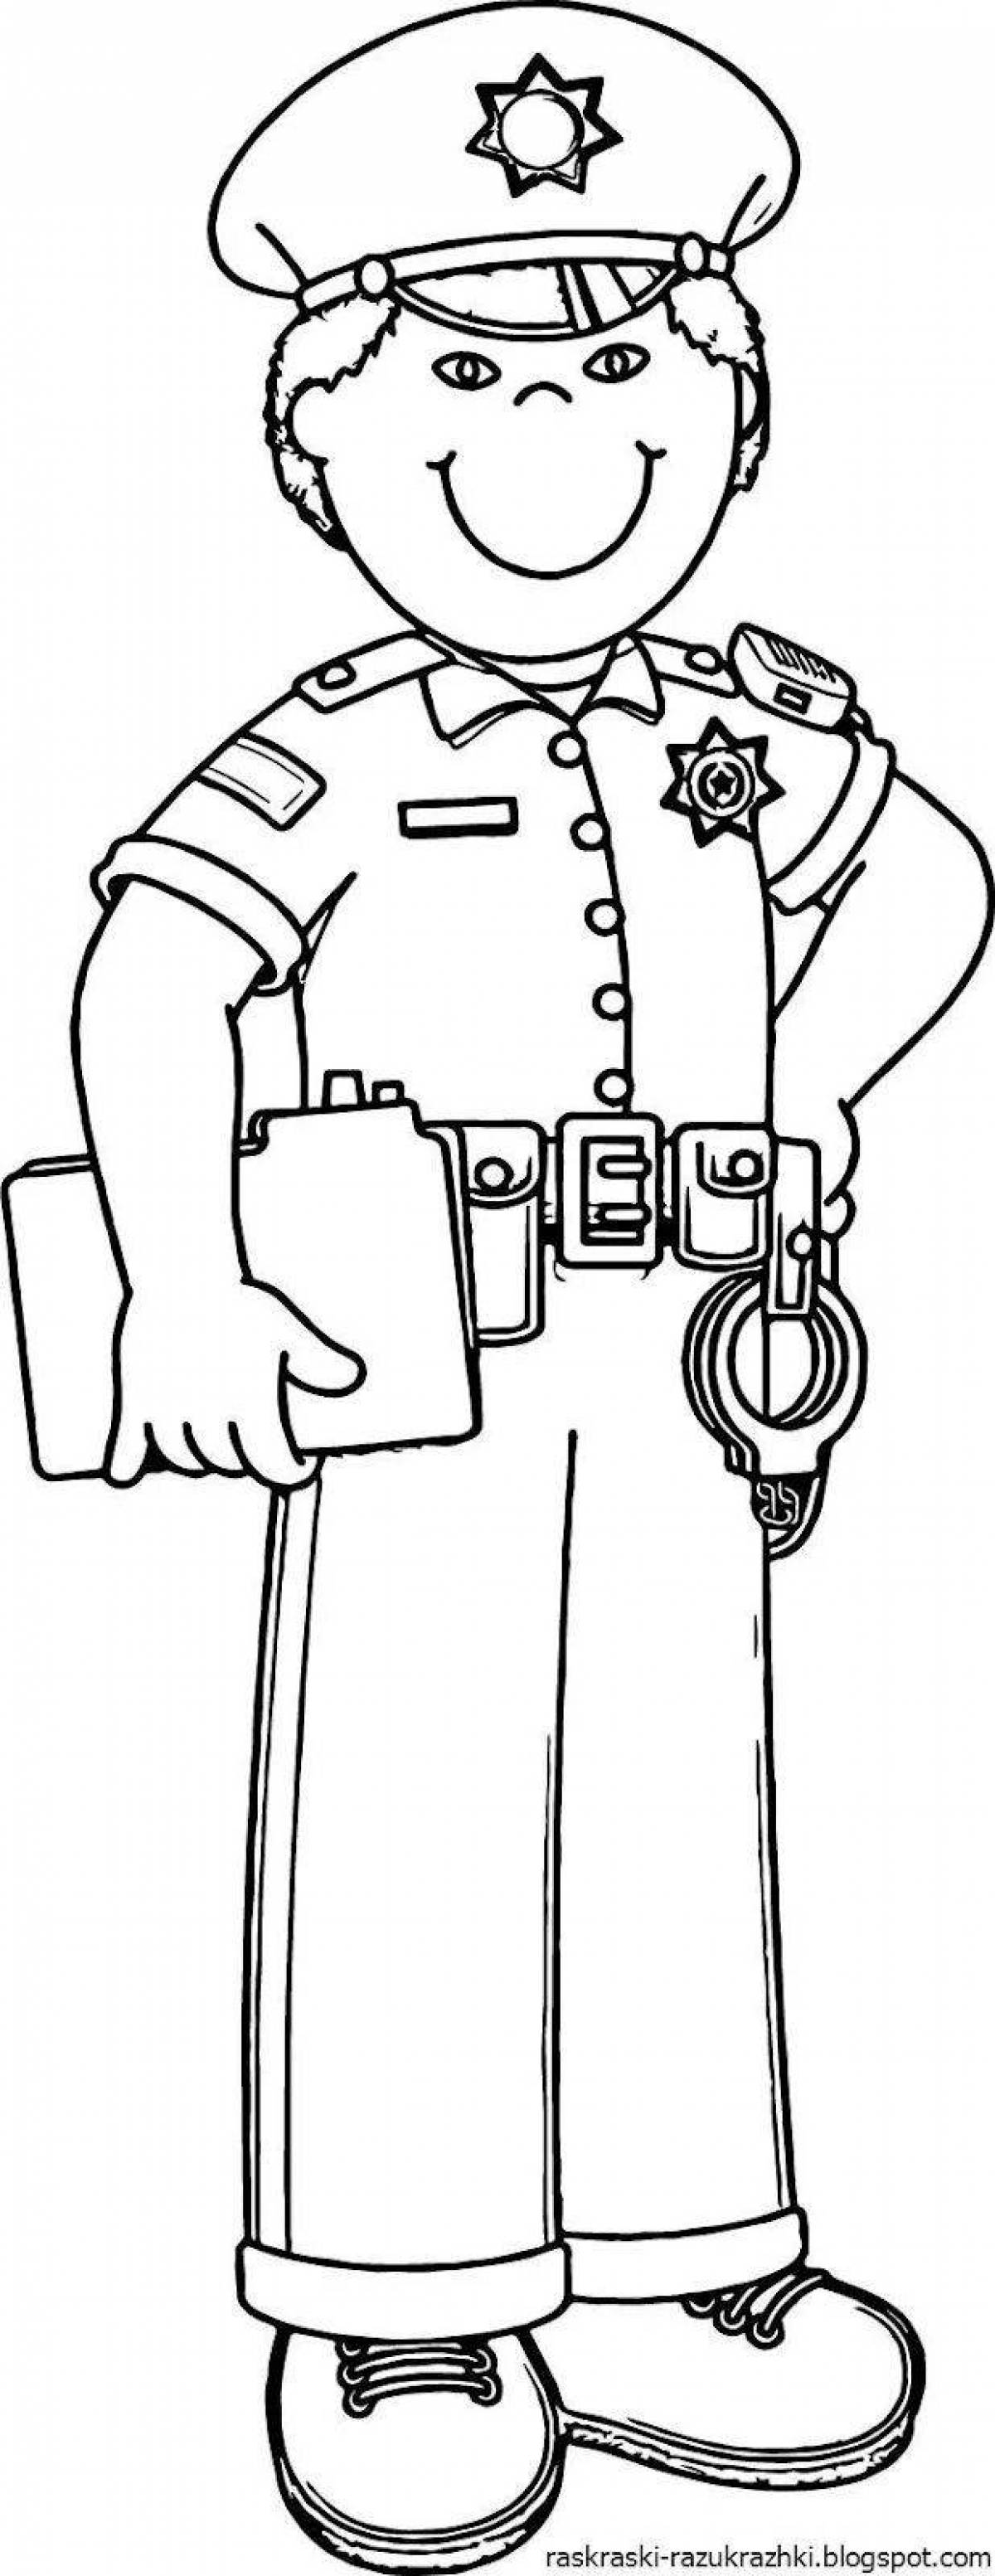 Coloring page energetic police profession